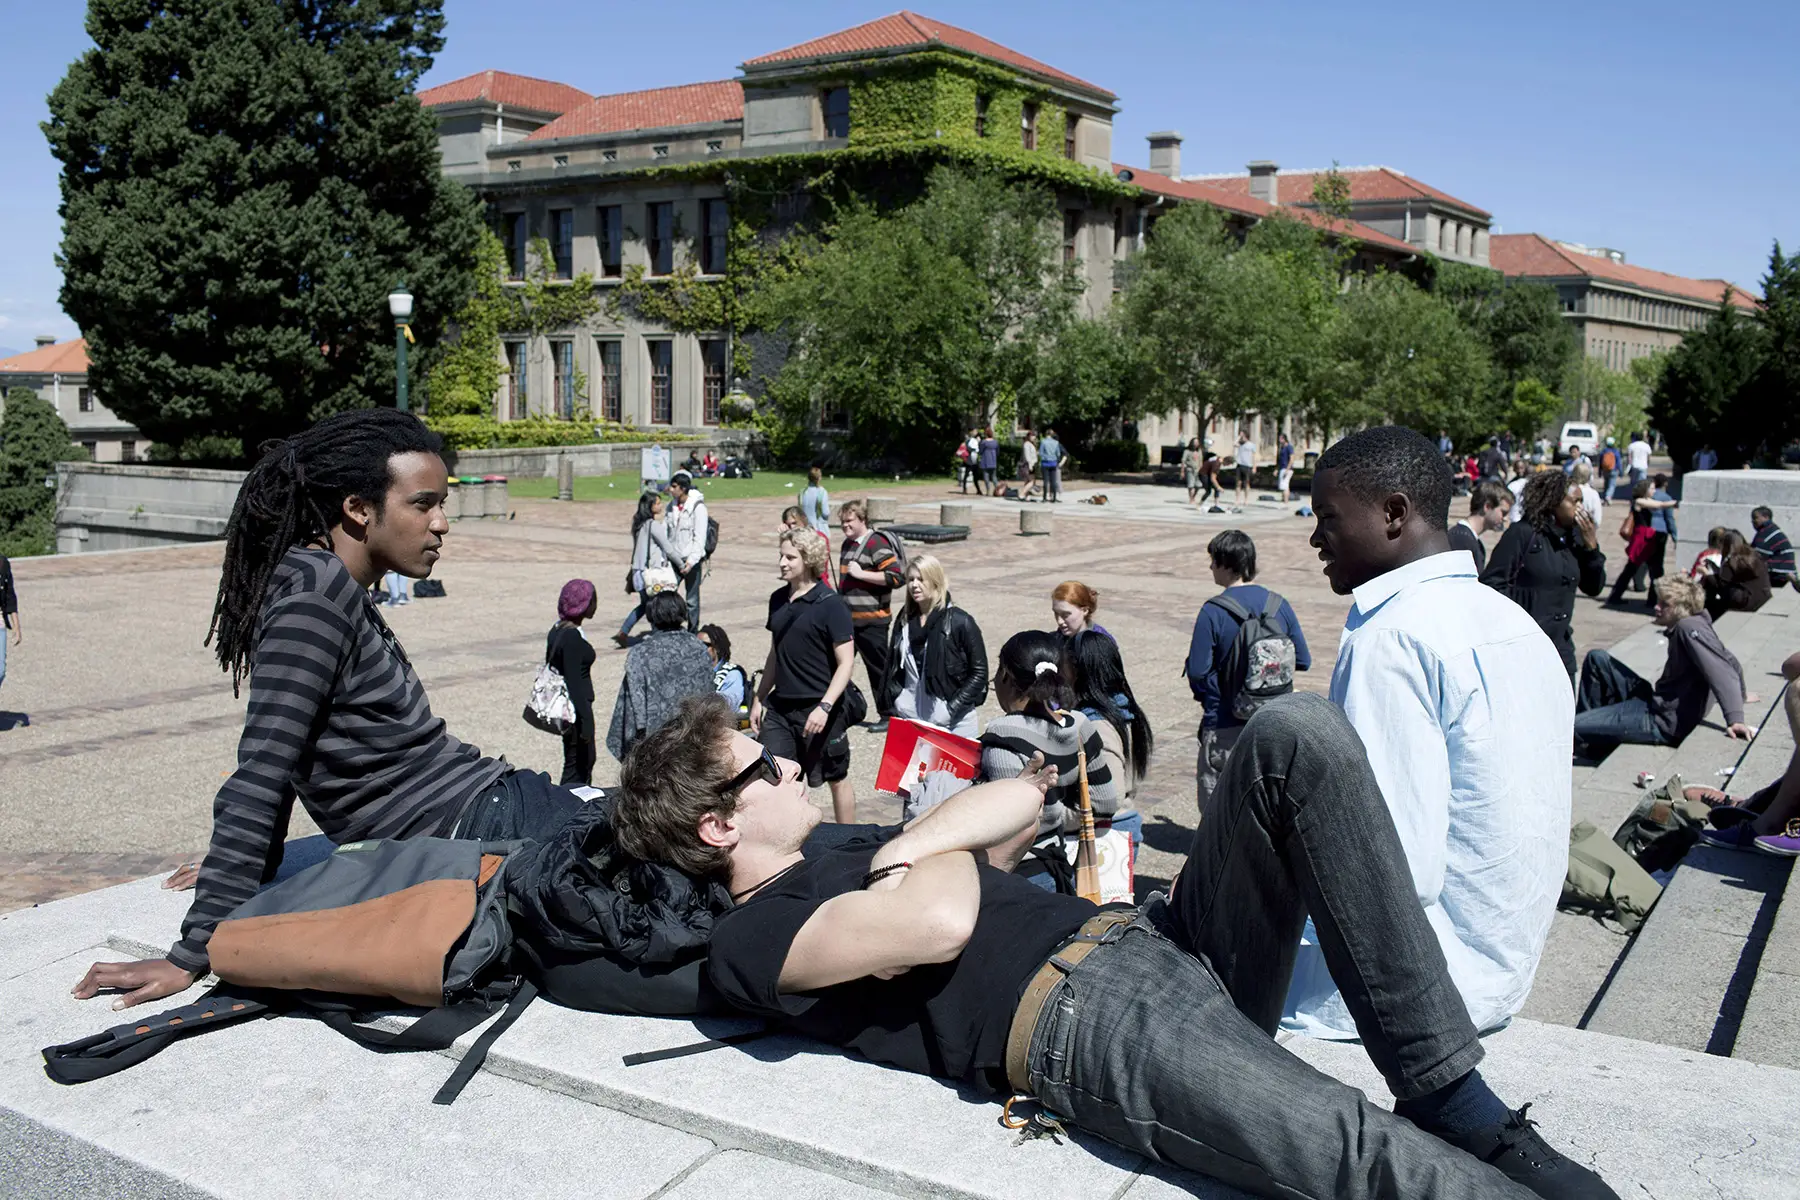 A diverse group of students relax and chat outside the University of Cape Town (UCT)